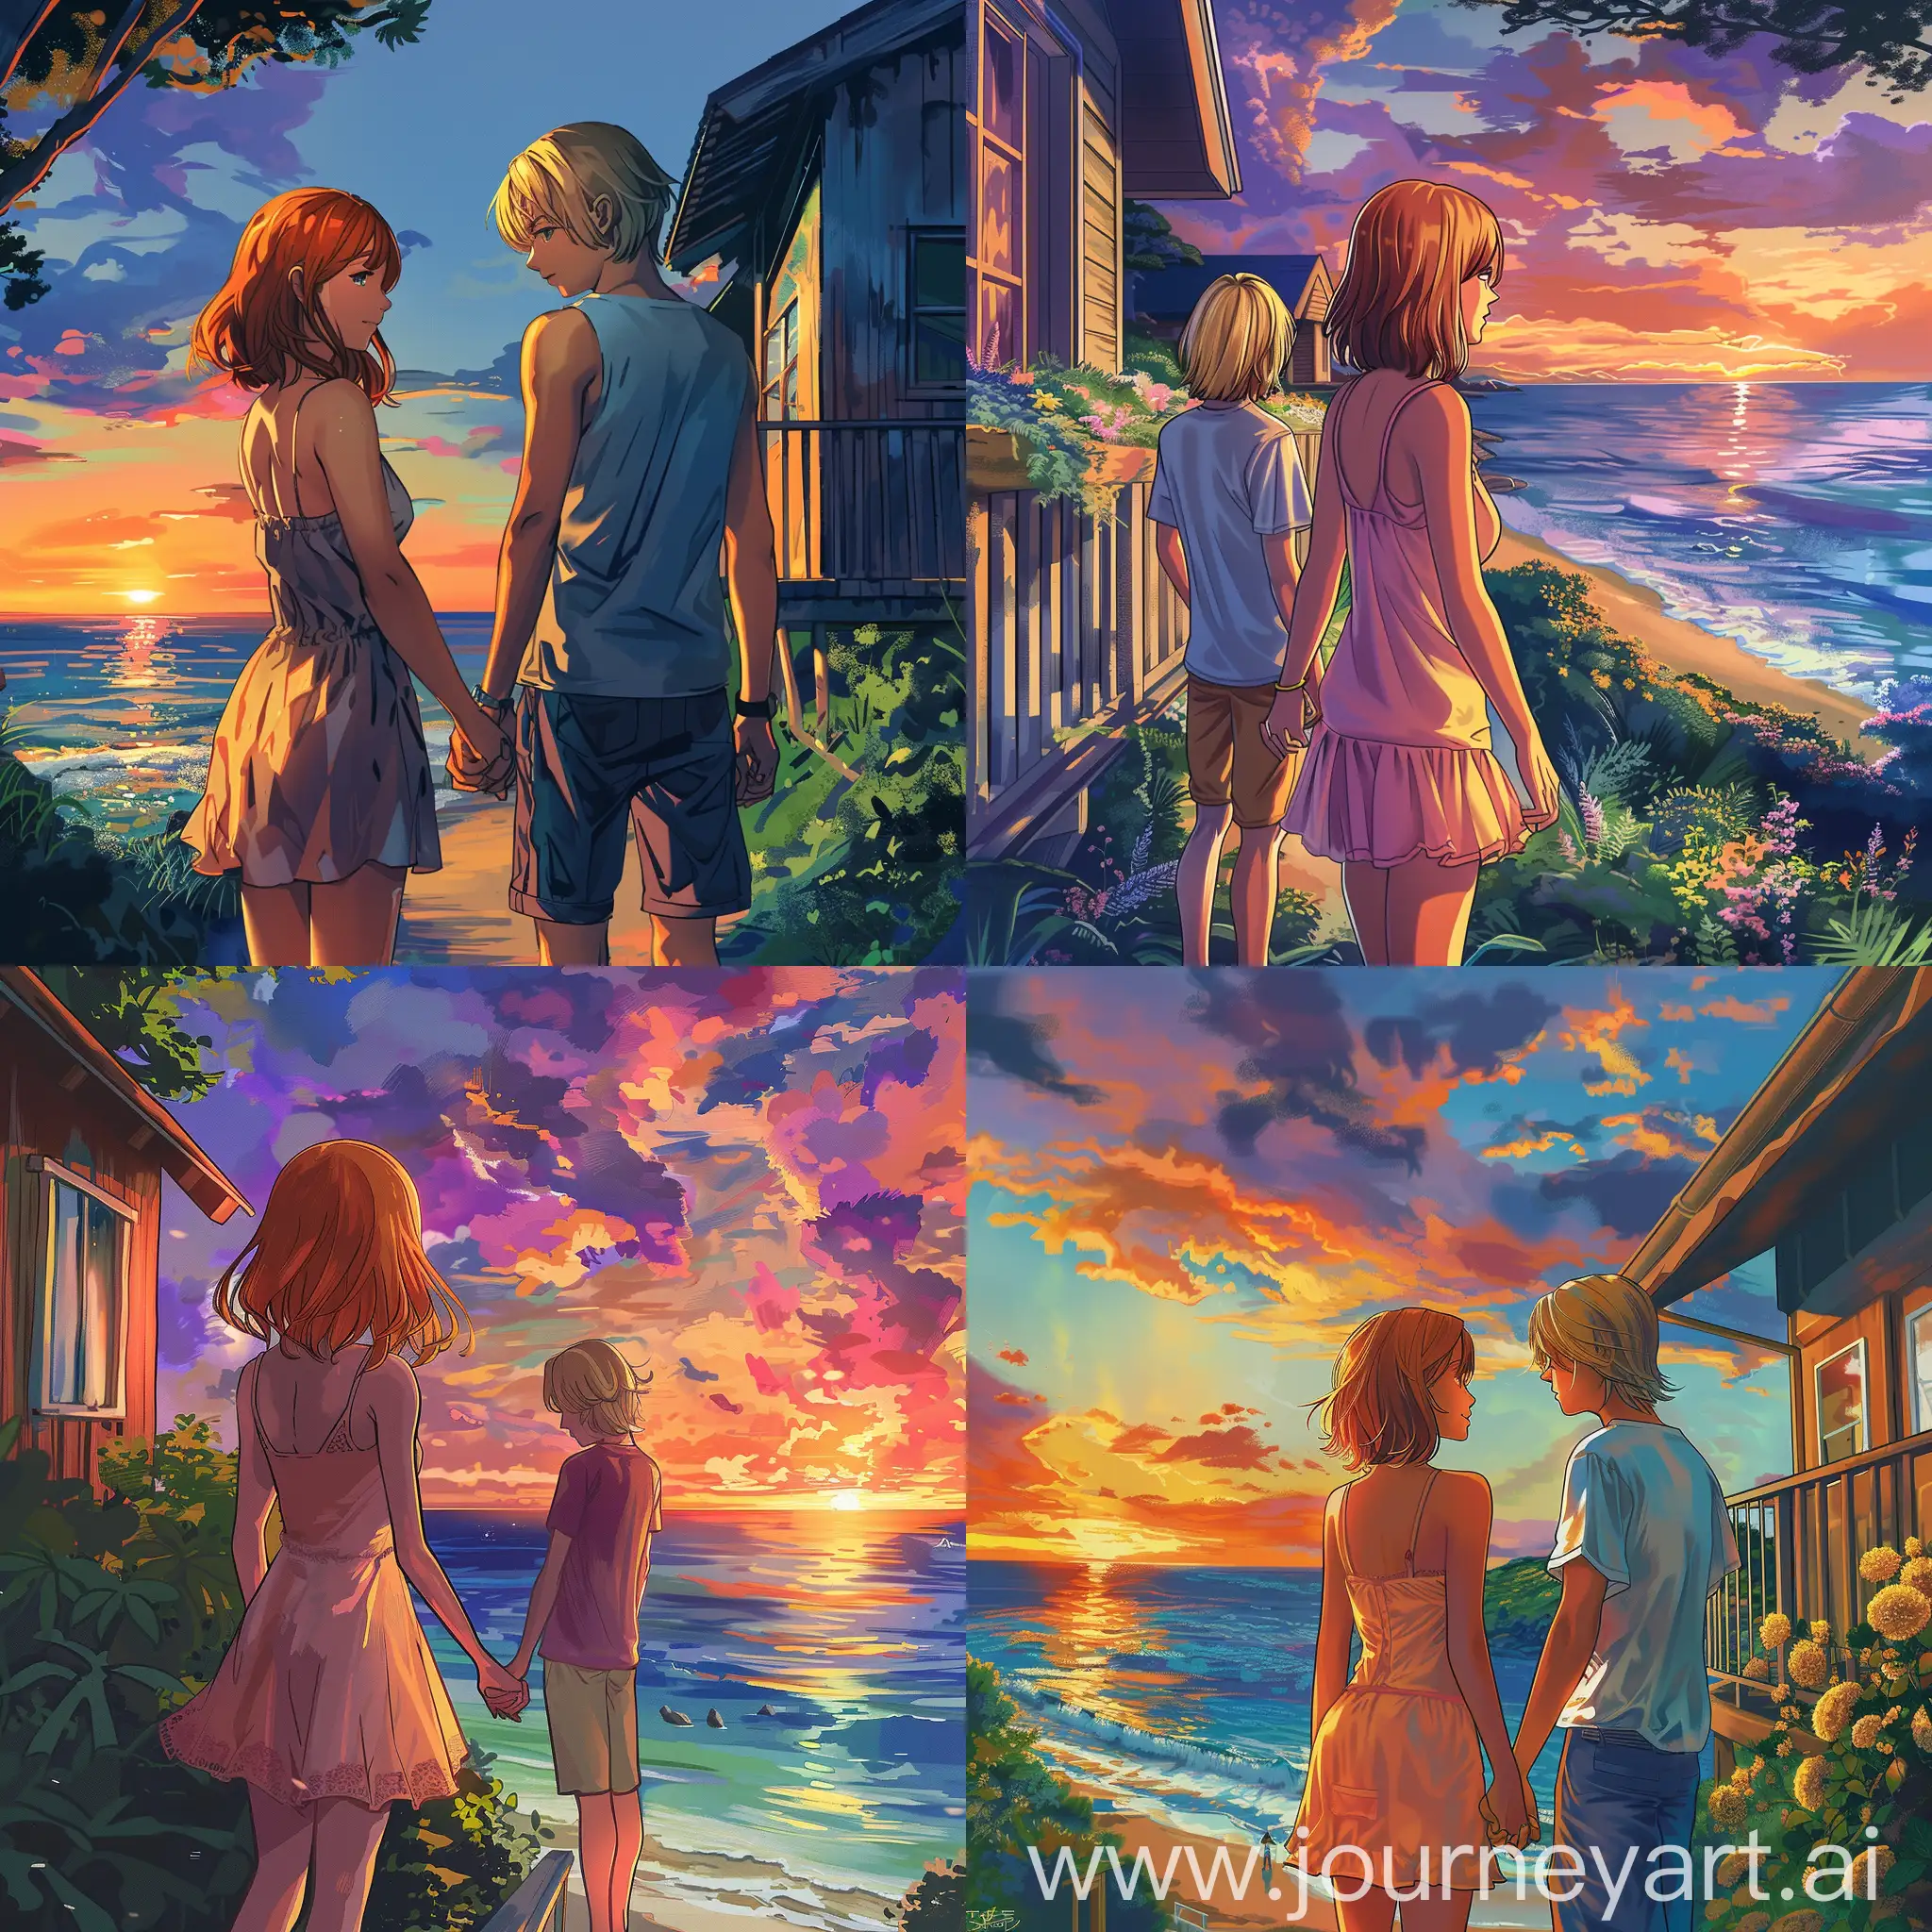 Romantic-Sunset-Stroll-by-the-Ocean-Young-Couple-in-Anime-Style